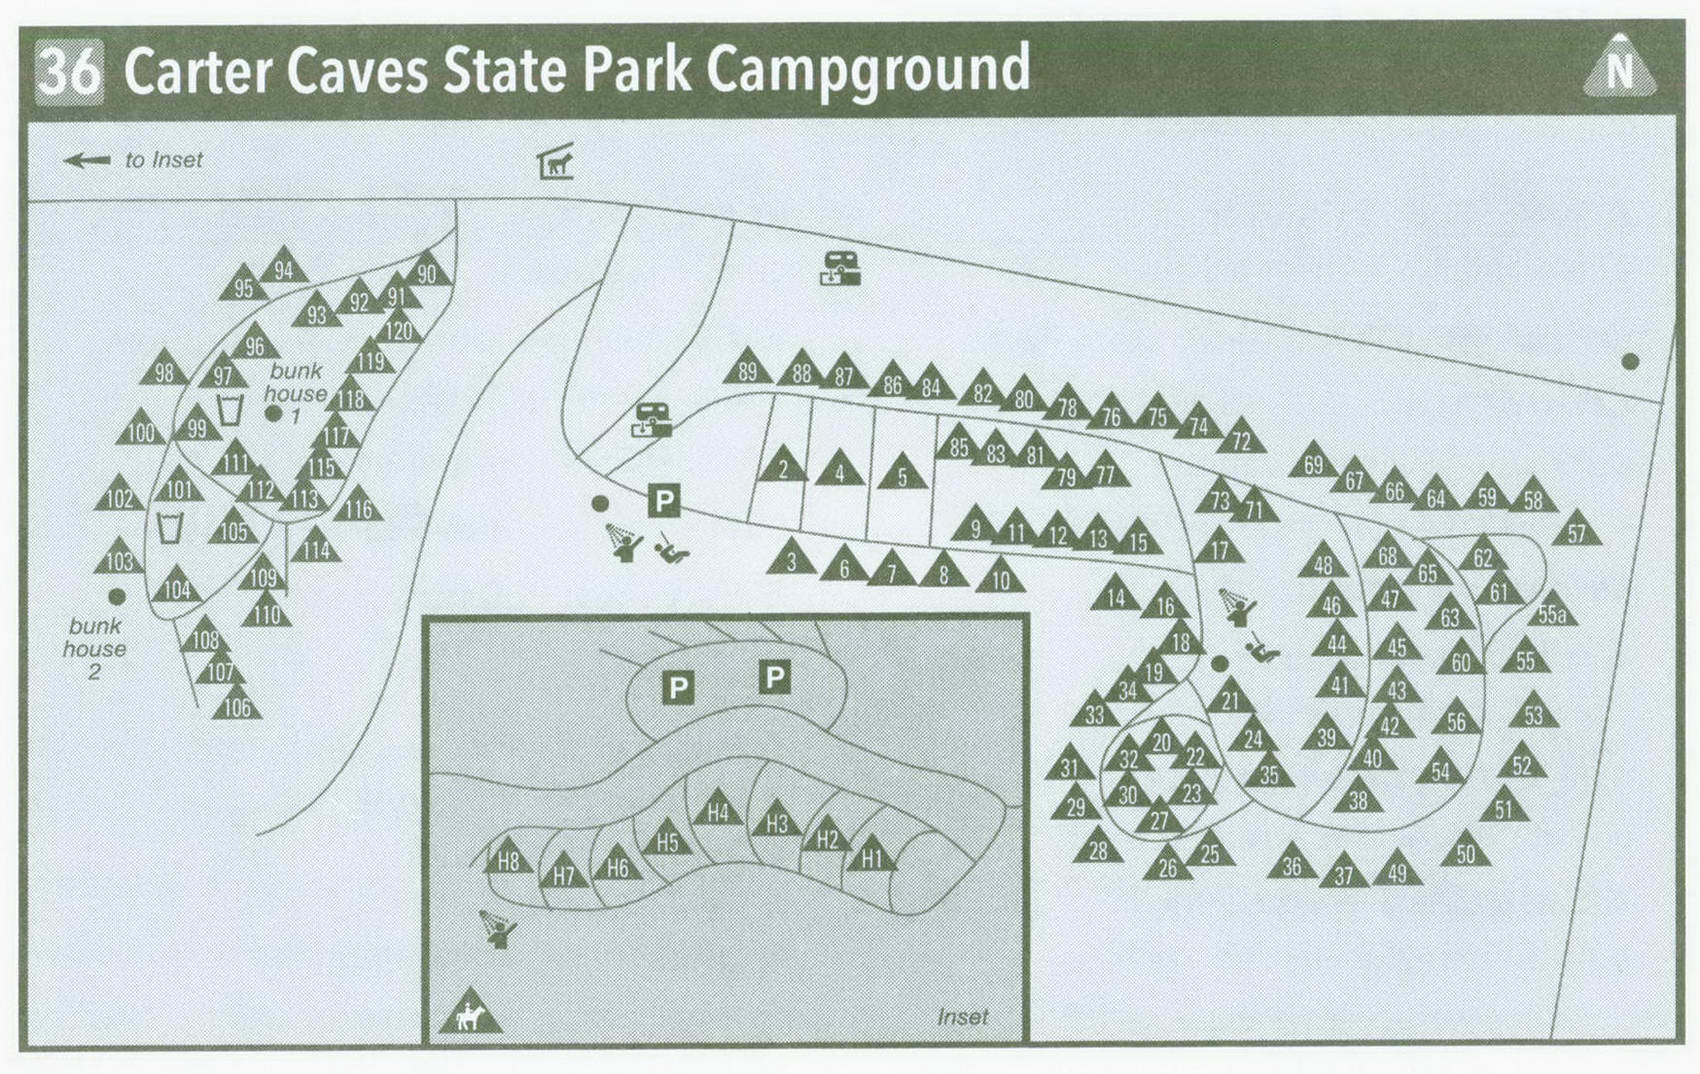 Plan of Carter Caves State Park Campground